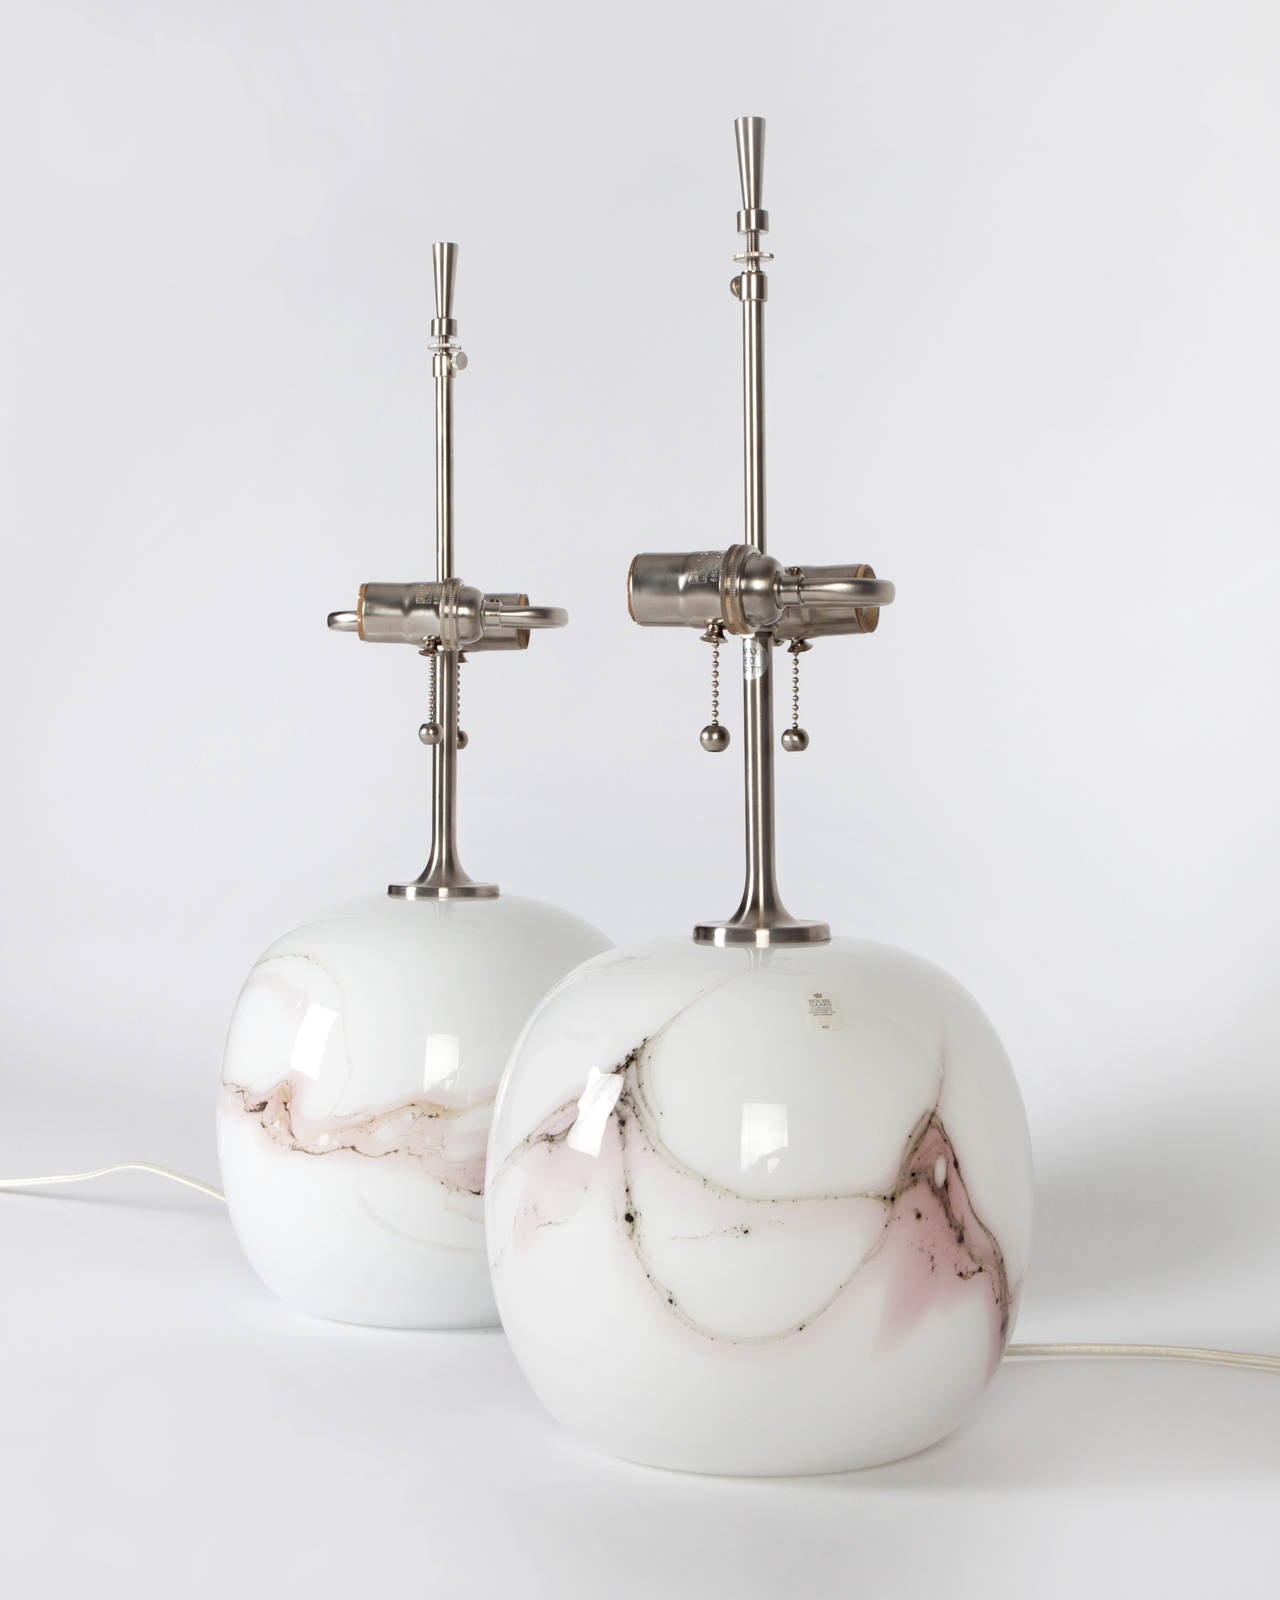 ATL1902

Circa 1980
A pair of “Sakura” glass lamps with satin nickel fittings. Signed by Michael Bang for the Danish maker Holmegaard. Due to the antique nature of this fixture, there may be some nicks or imperfections in the